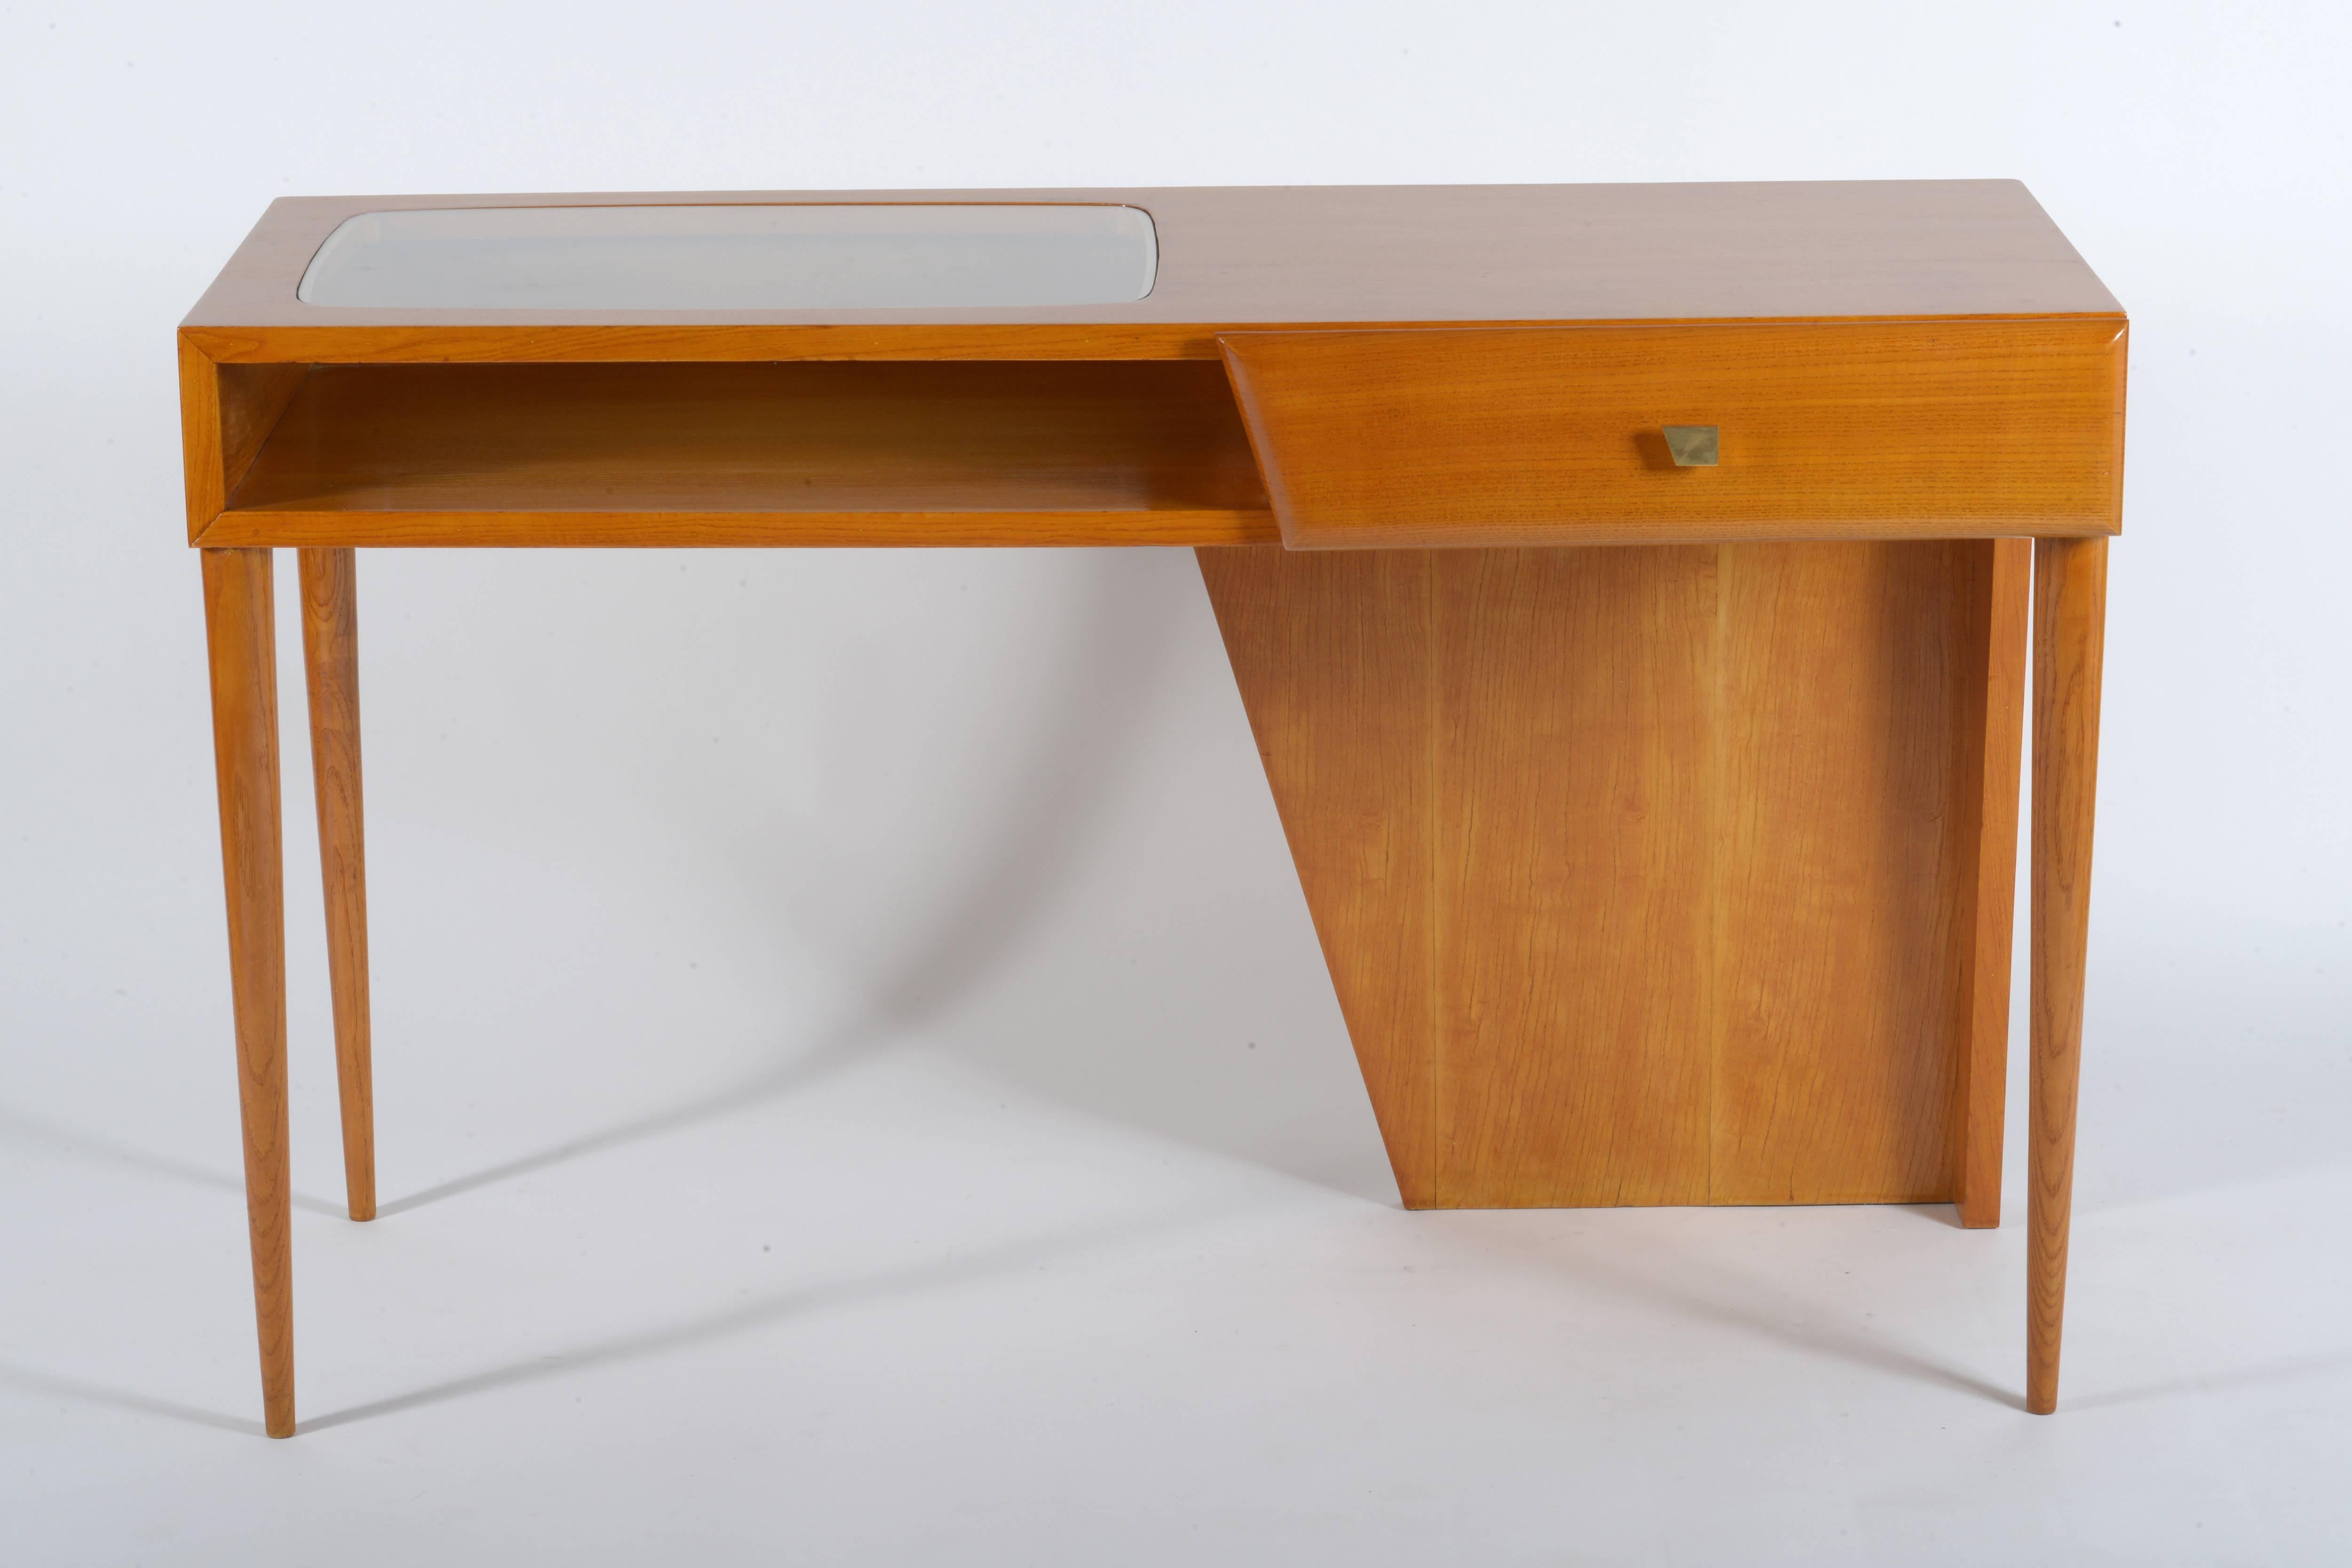 Wall desk in cherrywood with cast brass handle. Oval encased in glass.
Conical slender legs.
The desk should be leaning against the wall, behind a sofa, is not finished behind.